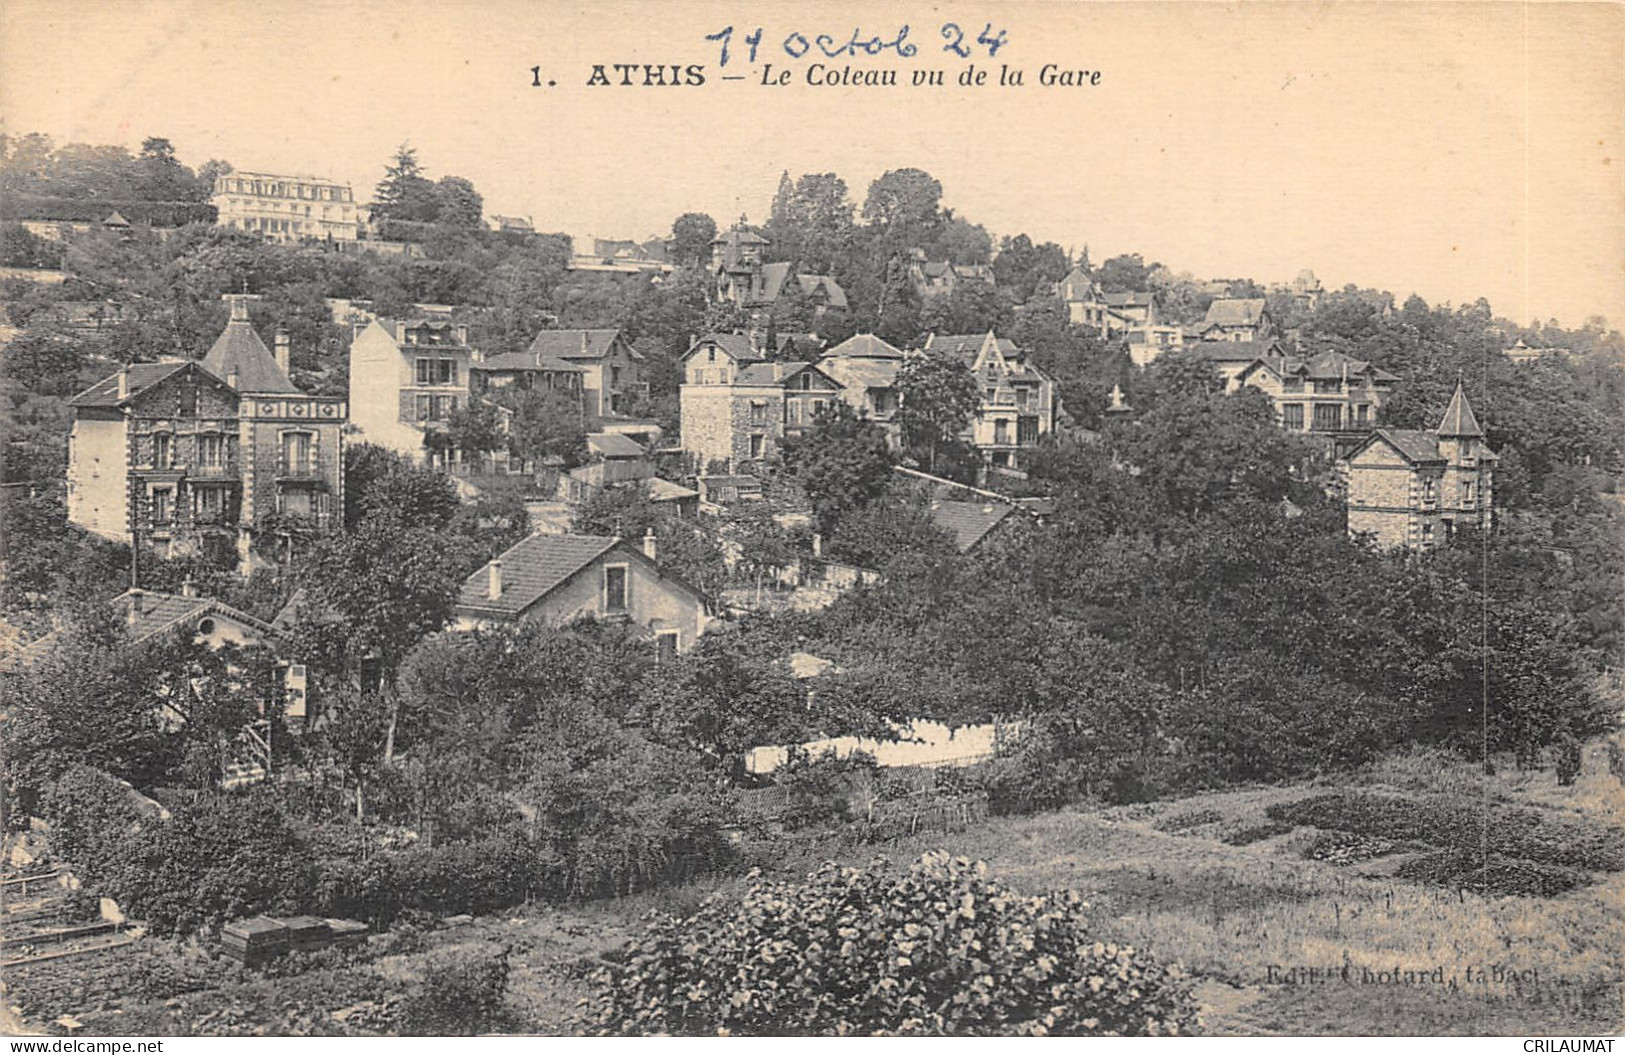 91-ATHIS MONS-N°6048-C/0265 - Athis Mons